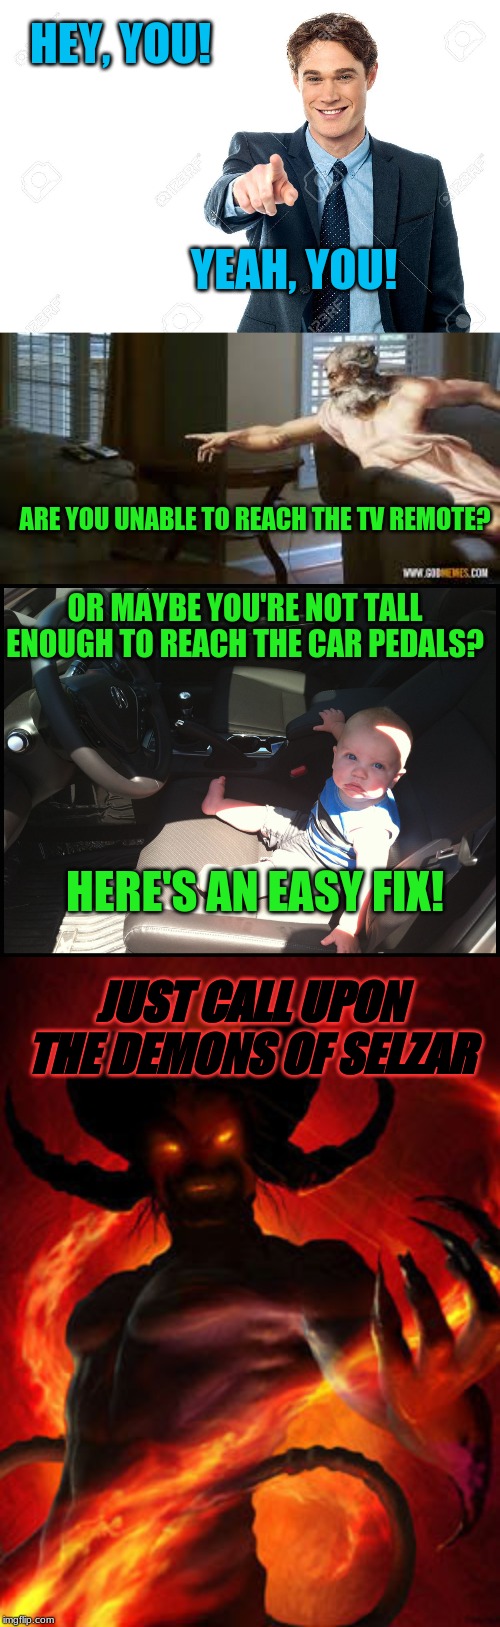 The Demons of Selzar | HEY, YOU! YEAH, YOU! ARE YOU UNABLE TO REACH THE TV REMOTE? OR MAYBE YOU'RE NOT TALL ENOUGH TO REACH THE CAR PEDALS? HERE'S AN EASY FIX! JUST CALL UPON THE DEMONS OF SELZAR | image tagged in demon,memes,dank memes,funny | made w/ Imgflip meme maker